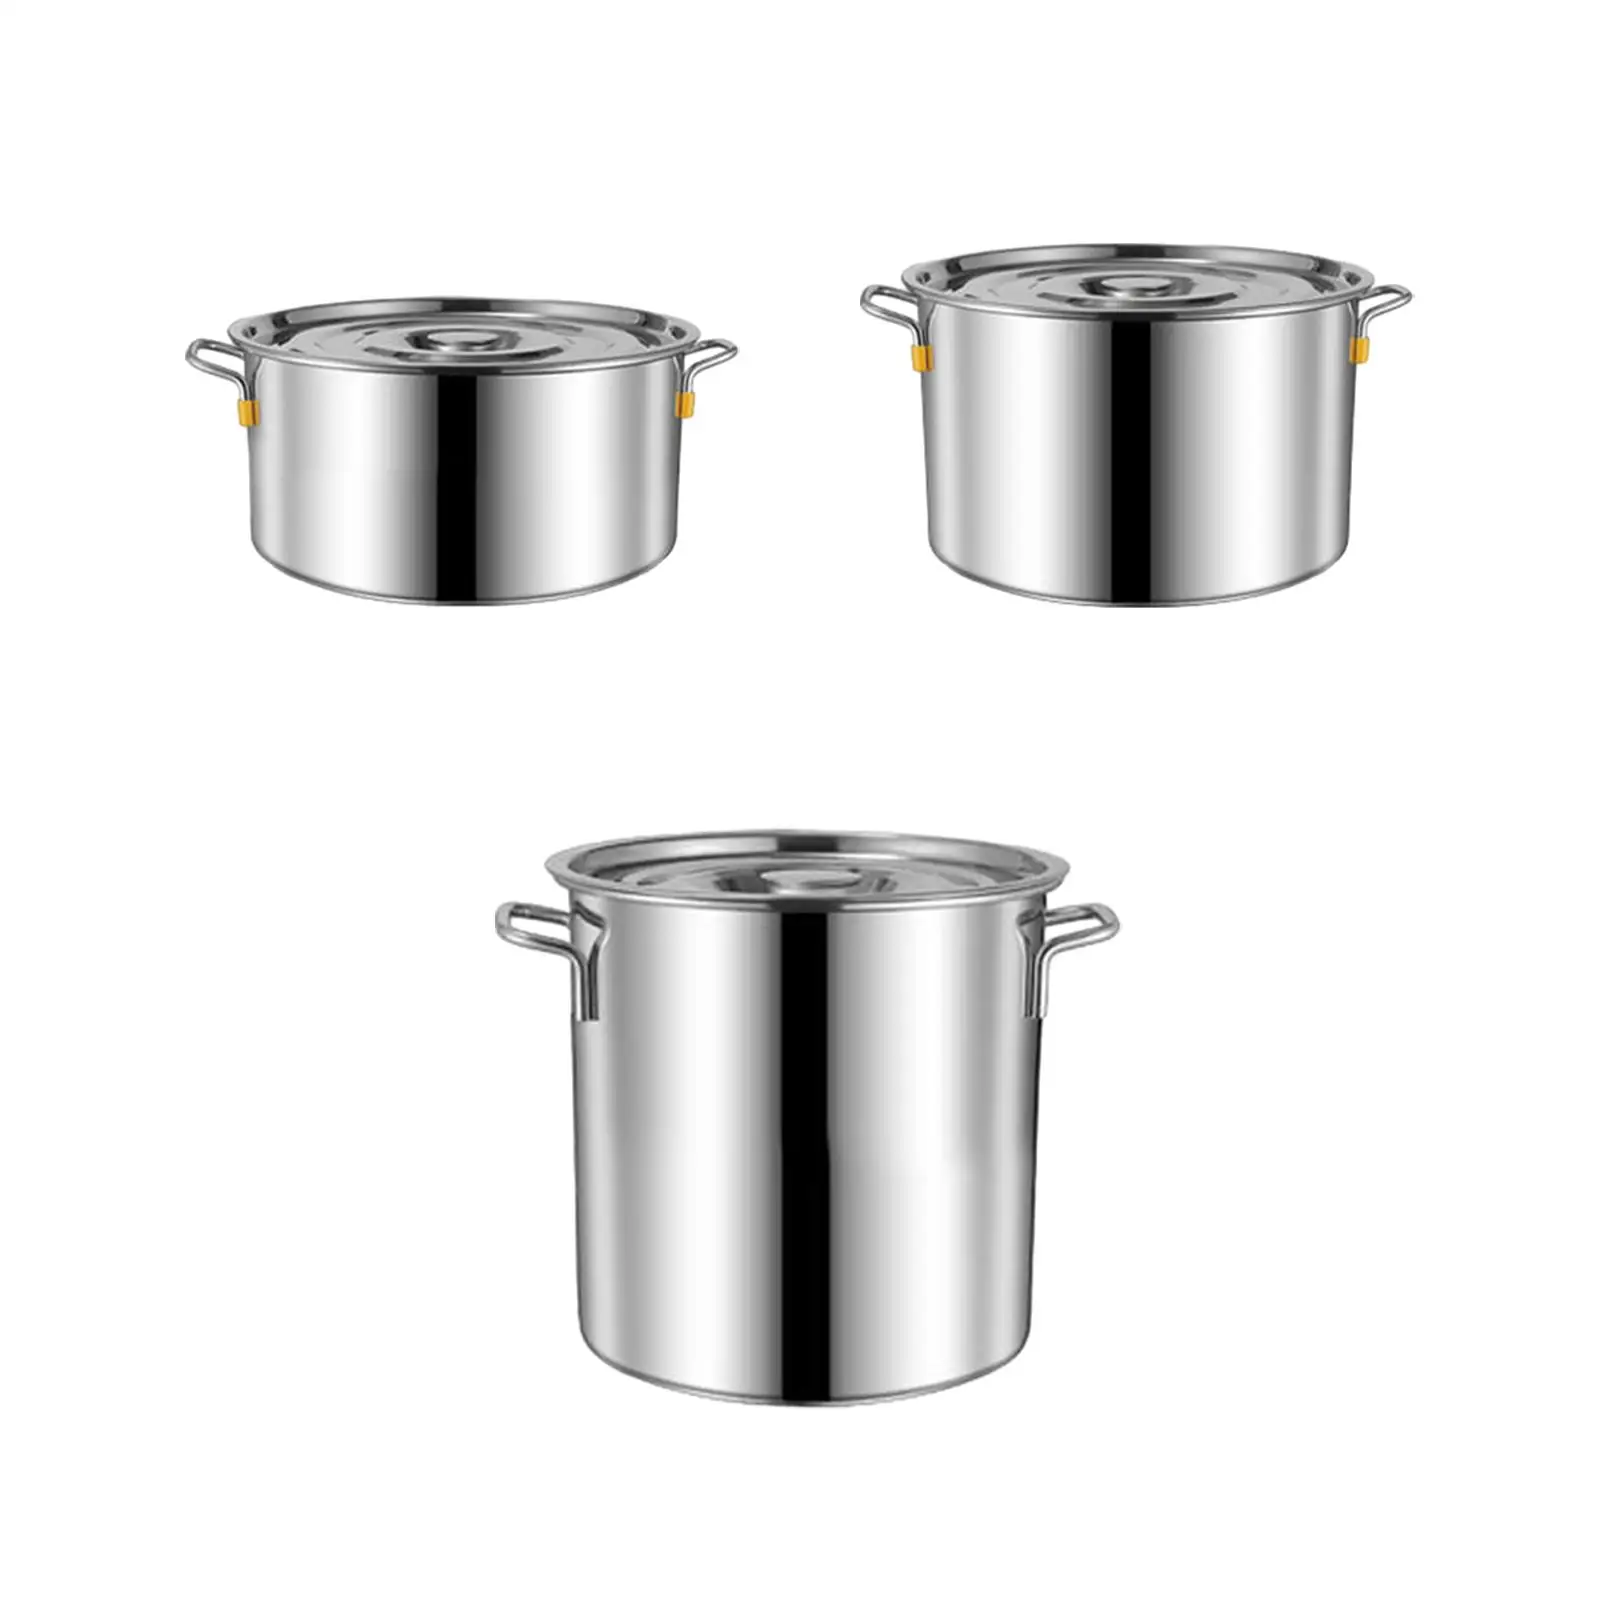 Versatile Cater Stew Soup Deep Dish Double Handle Cookware Set with Composite